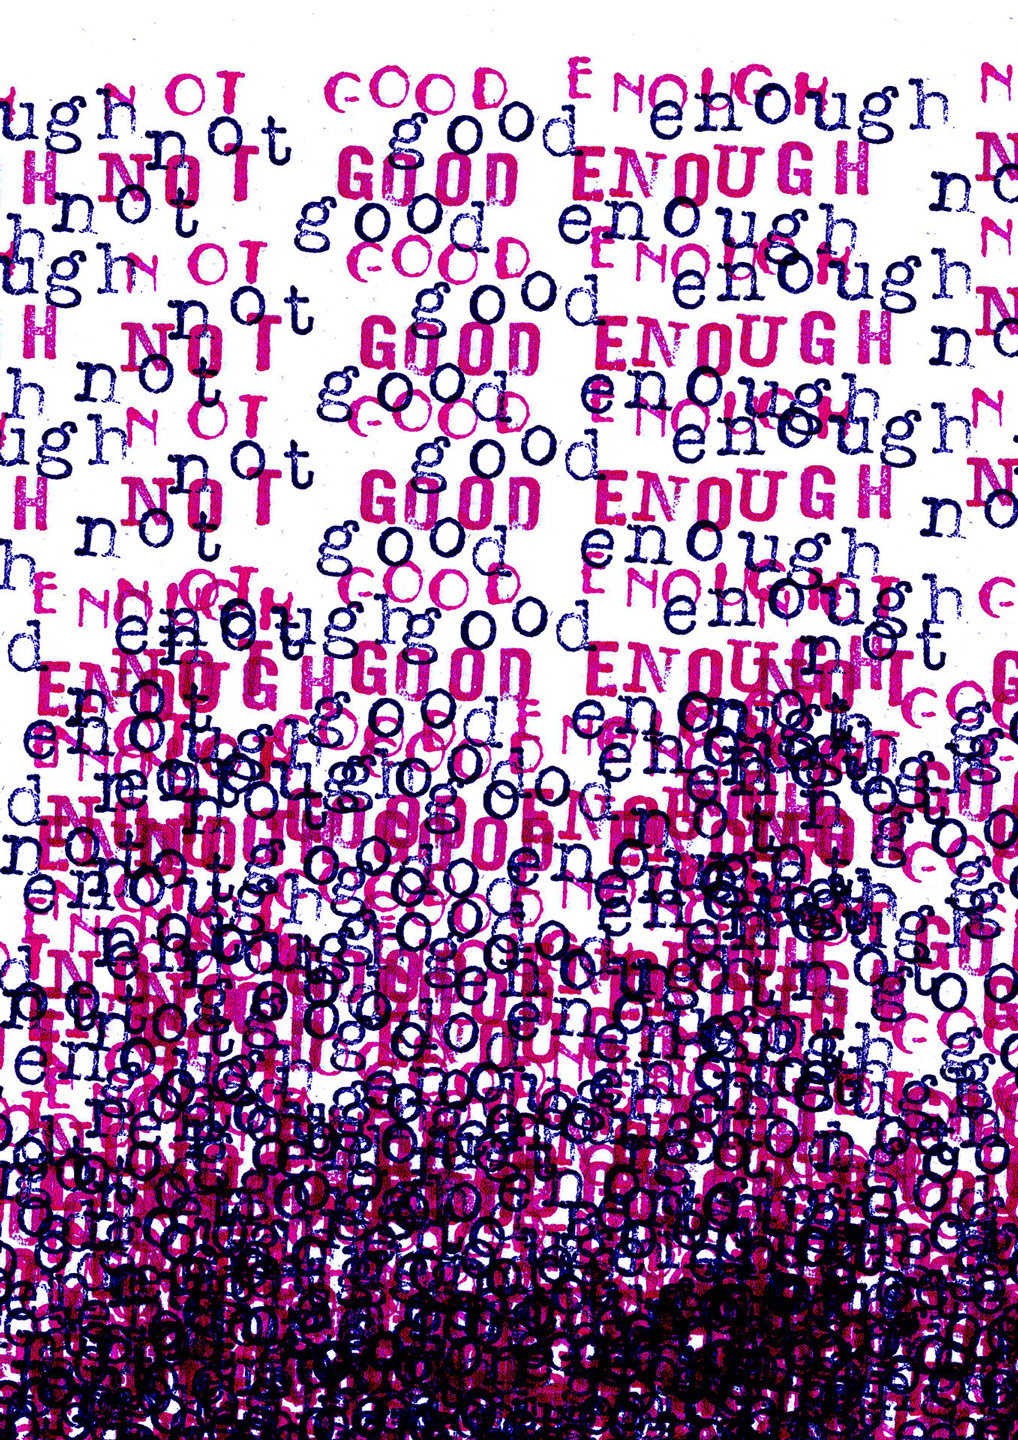 The image portrays distressed typography with bold words stating 'not good enough'. The font style appears similar to typewriter lettering. The words are repeated and layered over one another, creating a sense of chaos and overwhelm. Towards the bottom of the image, the text is so heavily overlapped that it becomes unreadable. The text is highlighted in bright pink and dark purple against a white background.